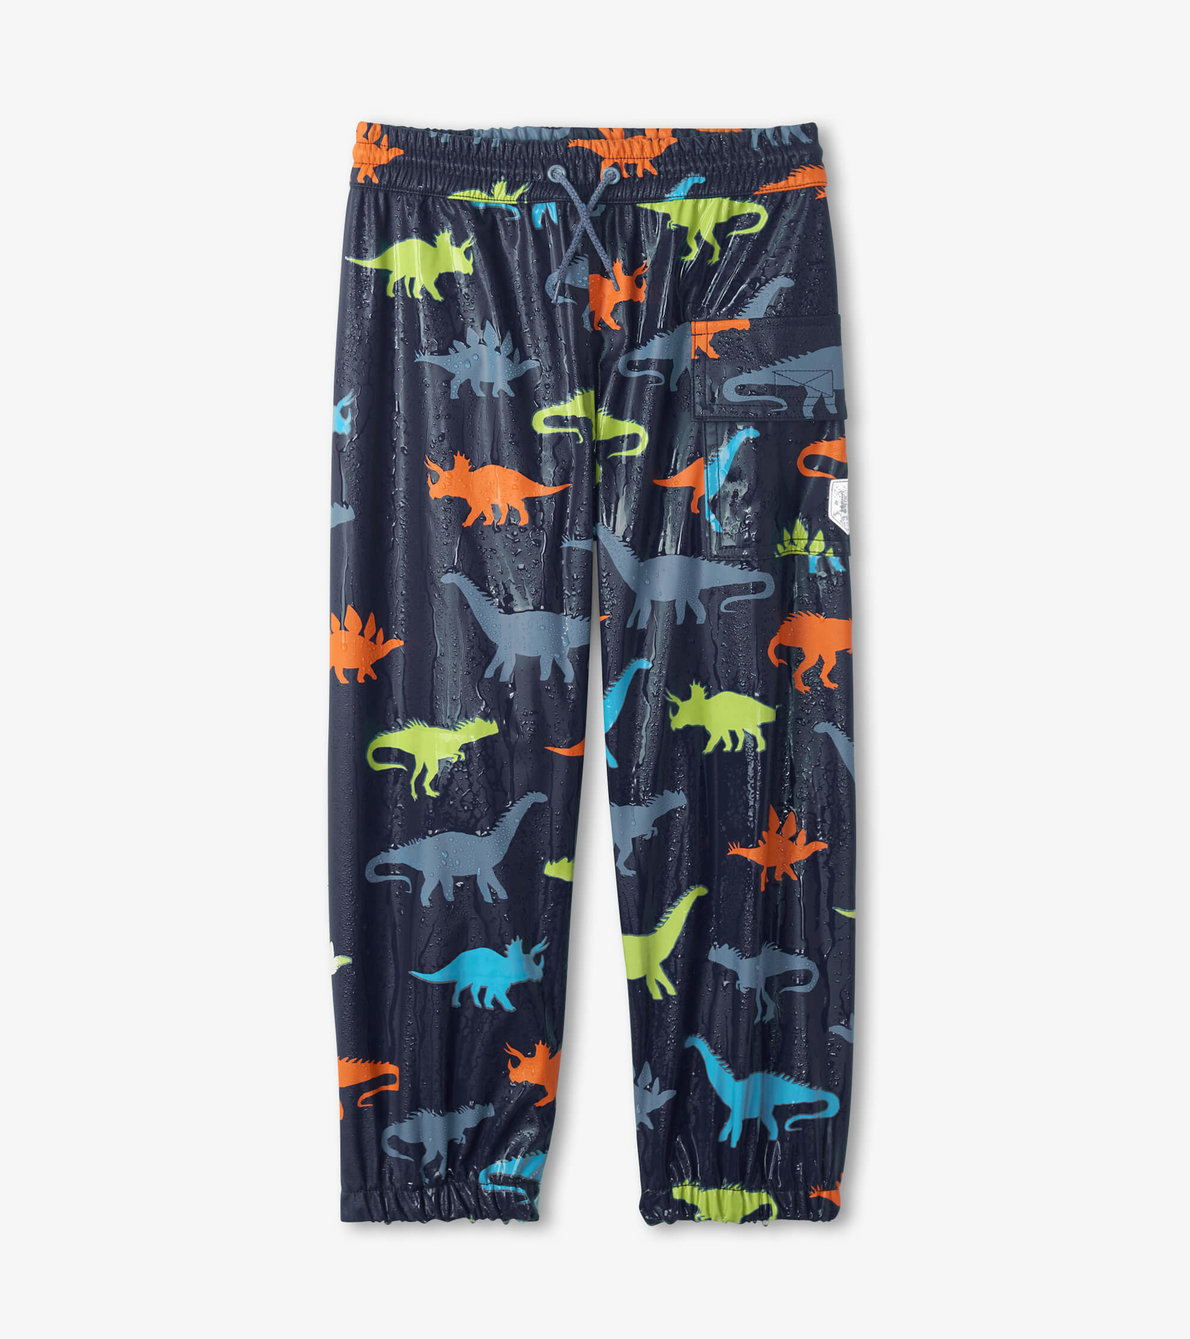 View larger image of Dino Silhouettes Colour Changing Splash Pants